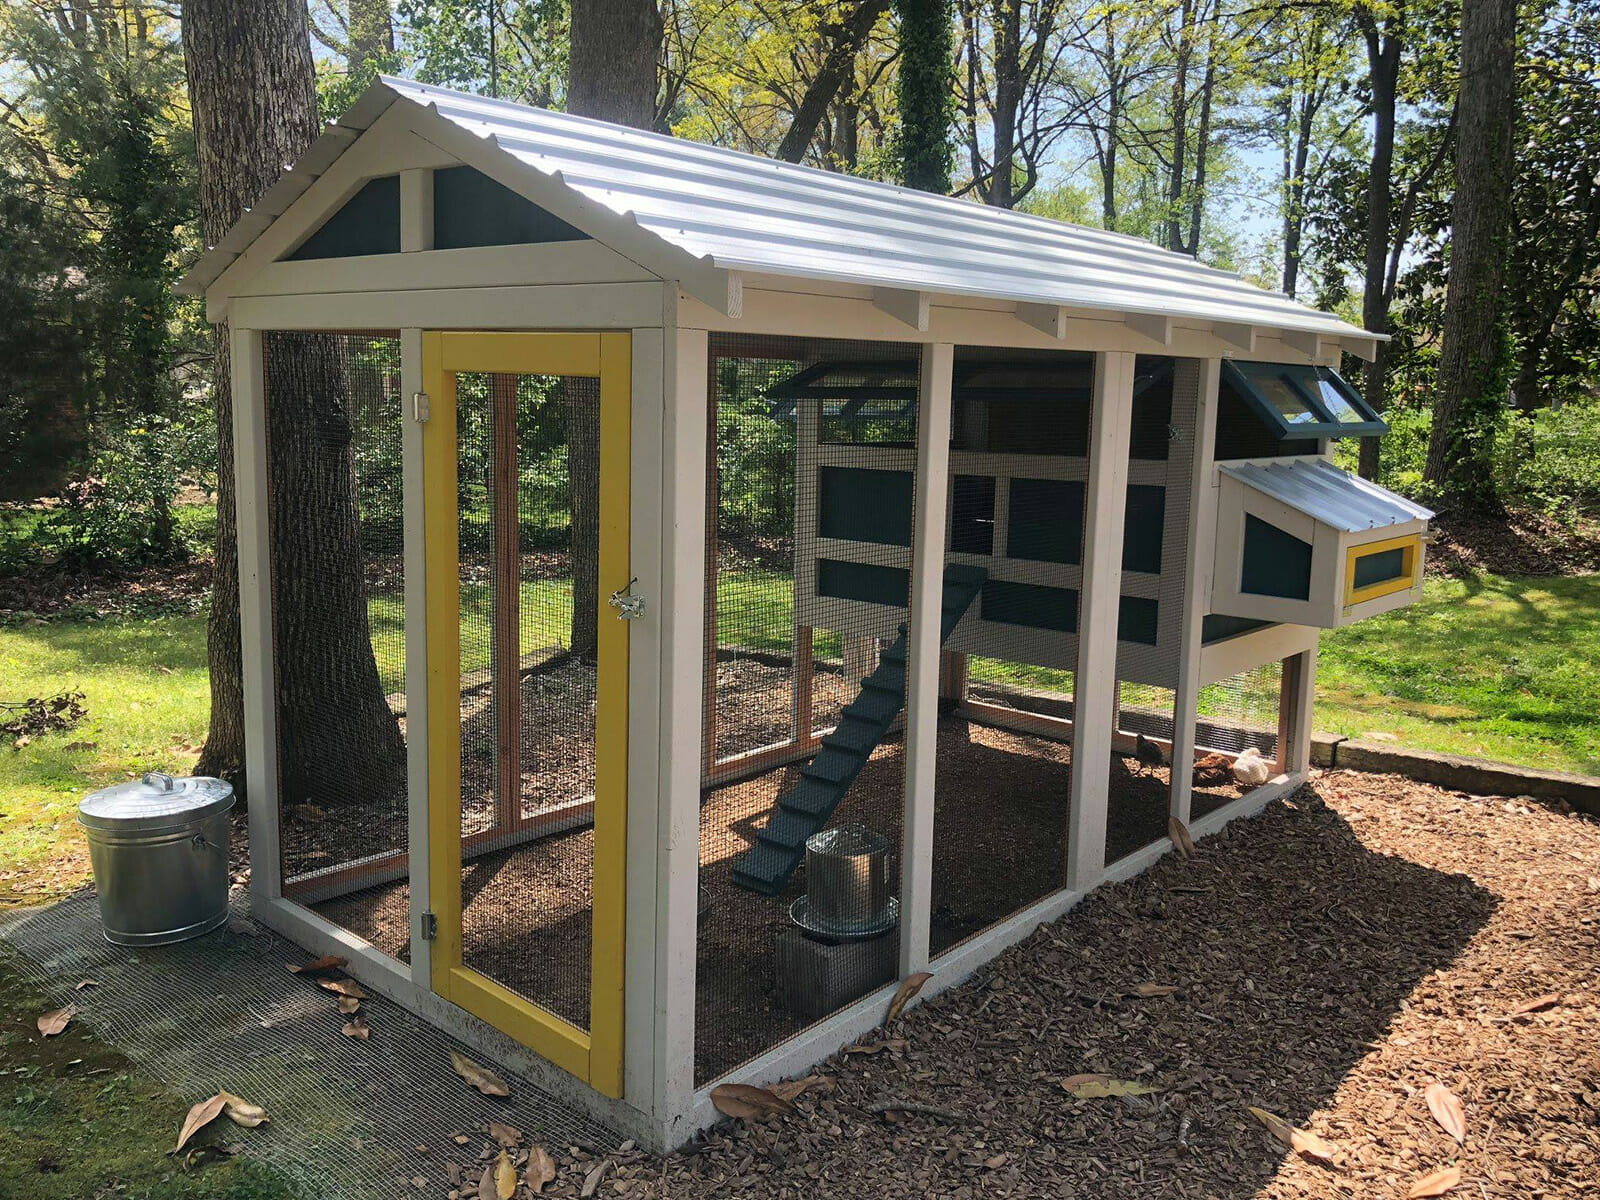 6′ x 12′ American Coop with 4′ x 6′ henhouse in Hickory, NC customer paint job